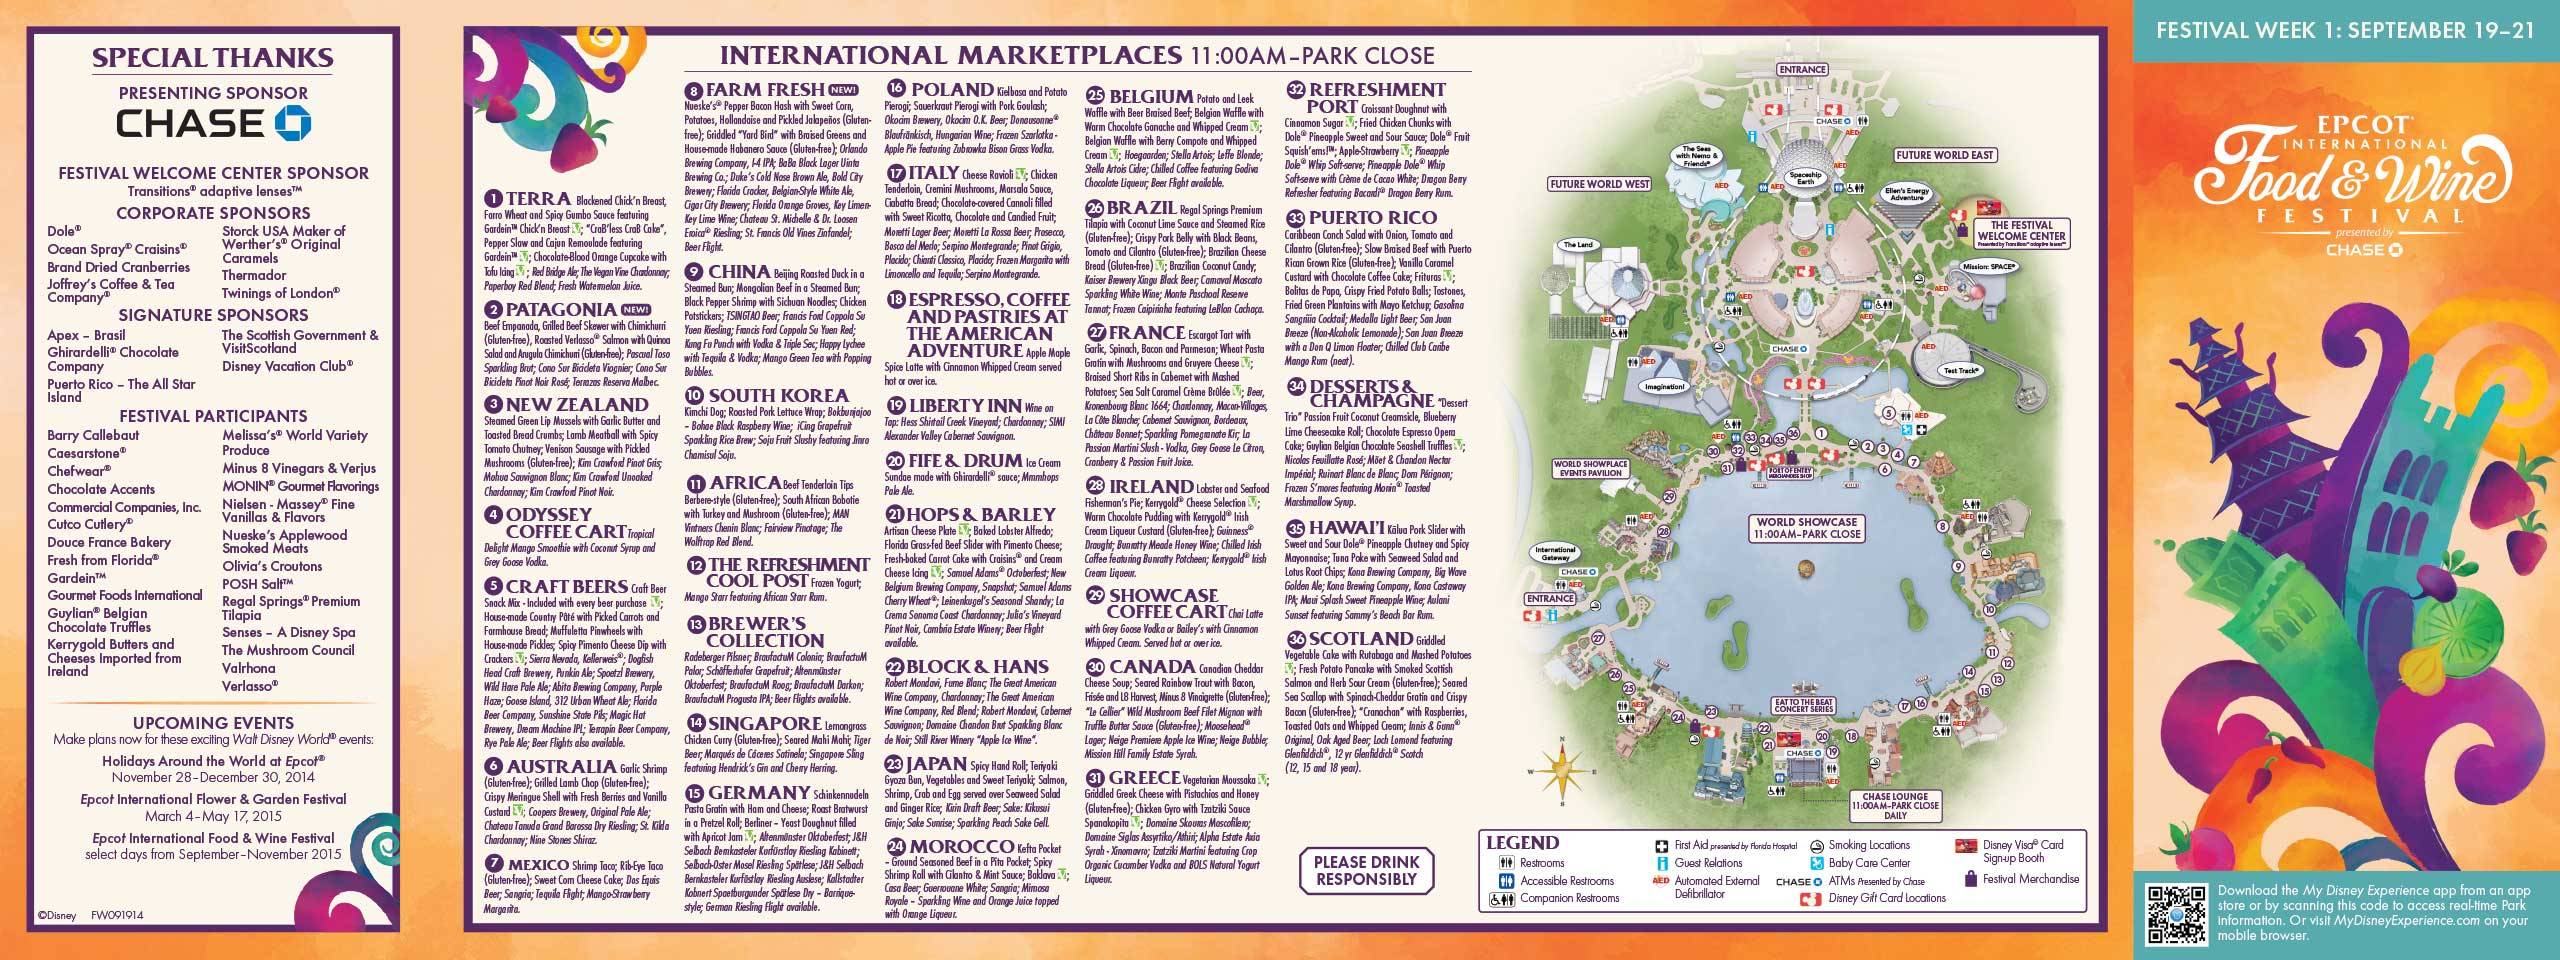 PHOTOS - 2014 Epcot International Food and Wine Festival guide map